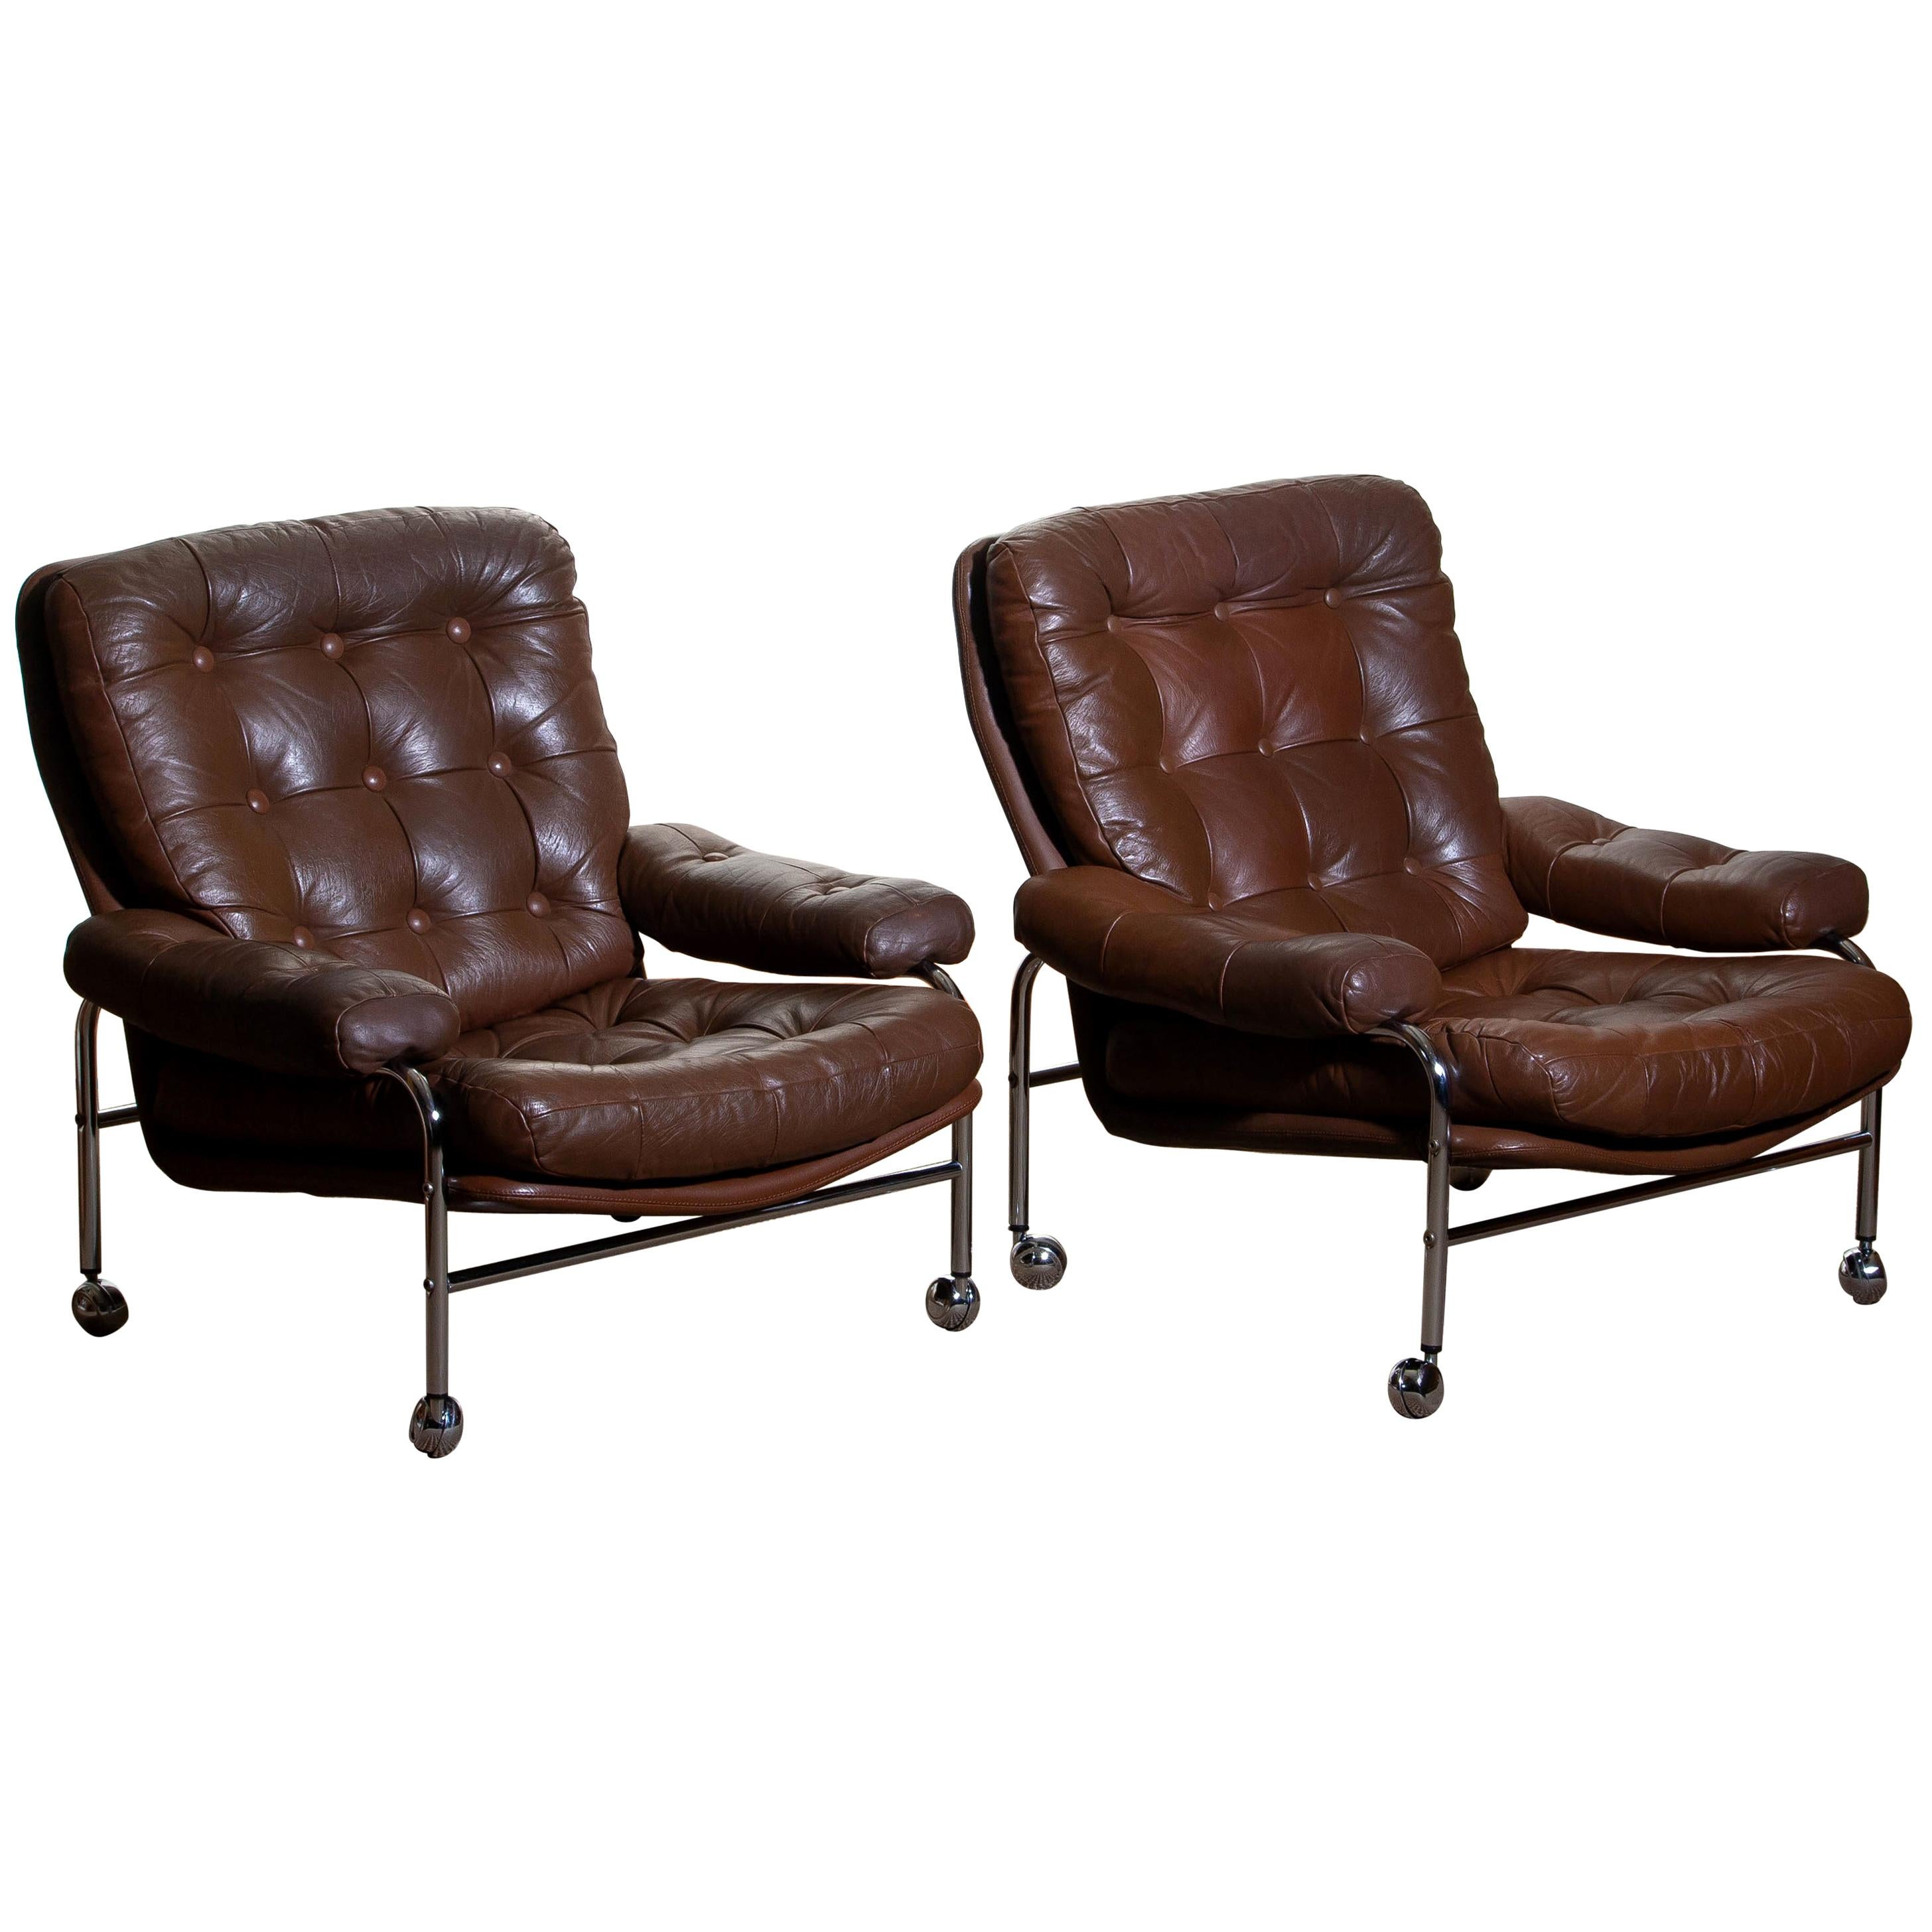 Mid-Century Modern 1970s, Chrome and Brown Leather Easy / Lounge Chairs by Scapa Rydaholm, Sweden